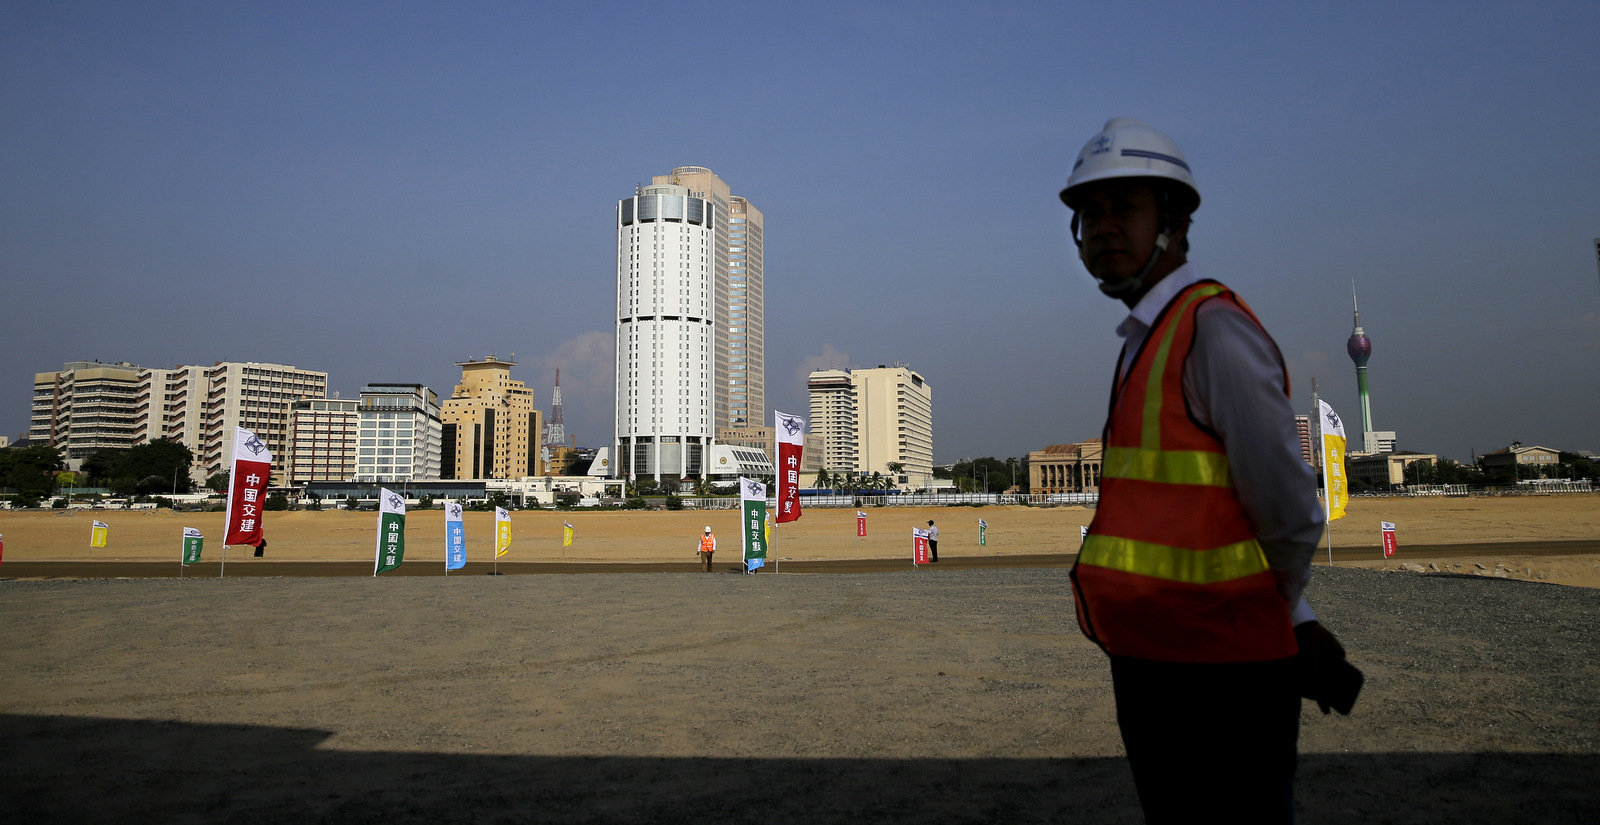 A Chinese construction worker stands on the land that was reclaimed from the Indian Ocean for the Colombo Port City project, on the Galle Face sea promenade in Colombo, Sri Lanka, Jan. 2, 2018. The Port City project was initiated as part of China's ambitious One Belt One Road initiative which envisages linking China's economic centers with energy-rich Persian Gulf along the ancient silk road. (AP/Eranga Jayawardena)